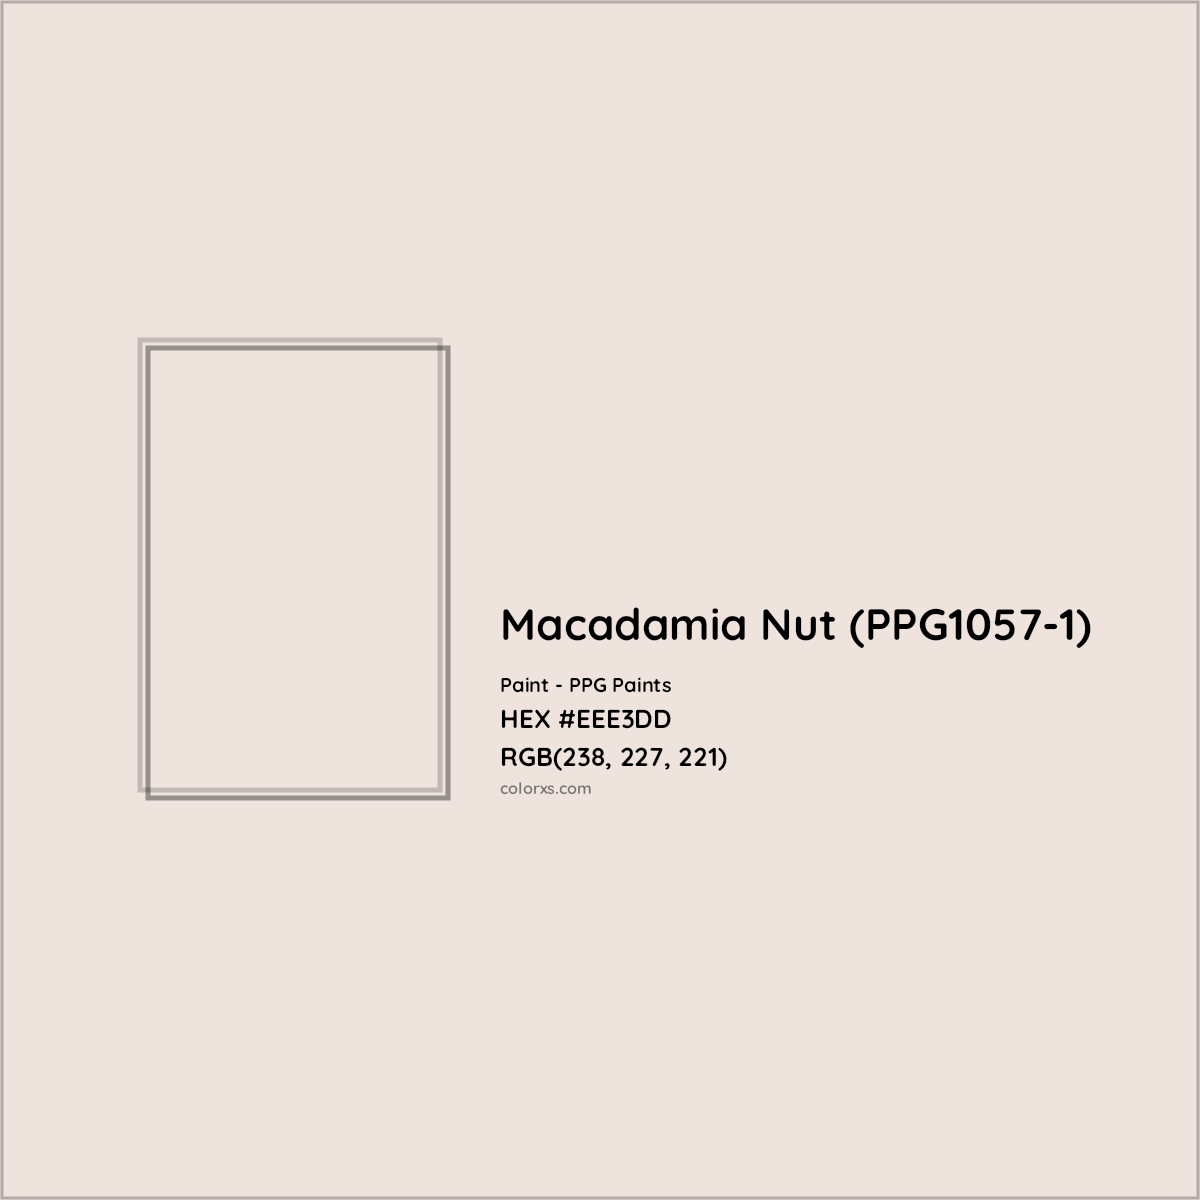 HEX #EEE3DD Macadamia Nut (PPG1057-1) Paint PPG Paints - Color Code